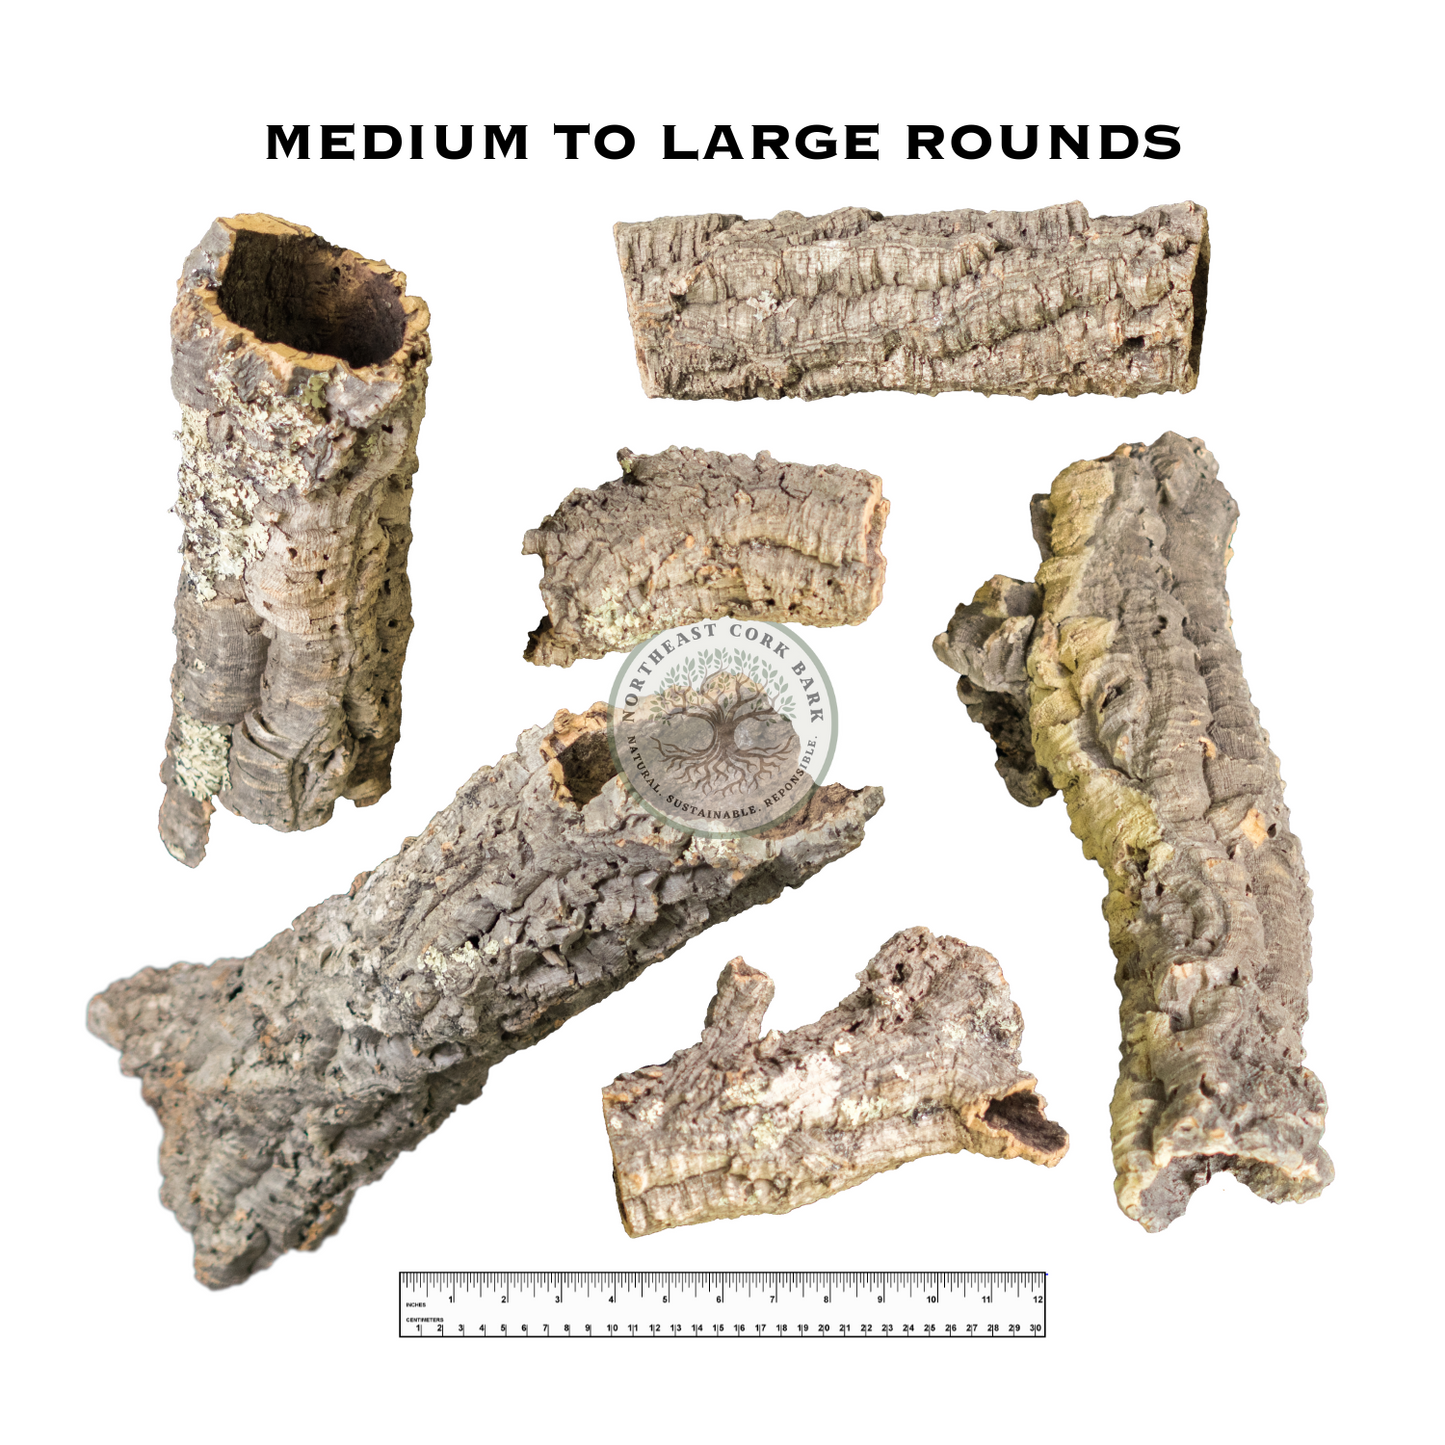 Premium Medium to Large Natural Cork Bark Rounds and Tubes Sizing Guide for Reptiles, Vivariums, and More.